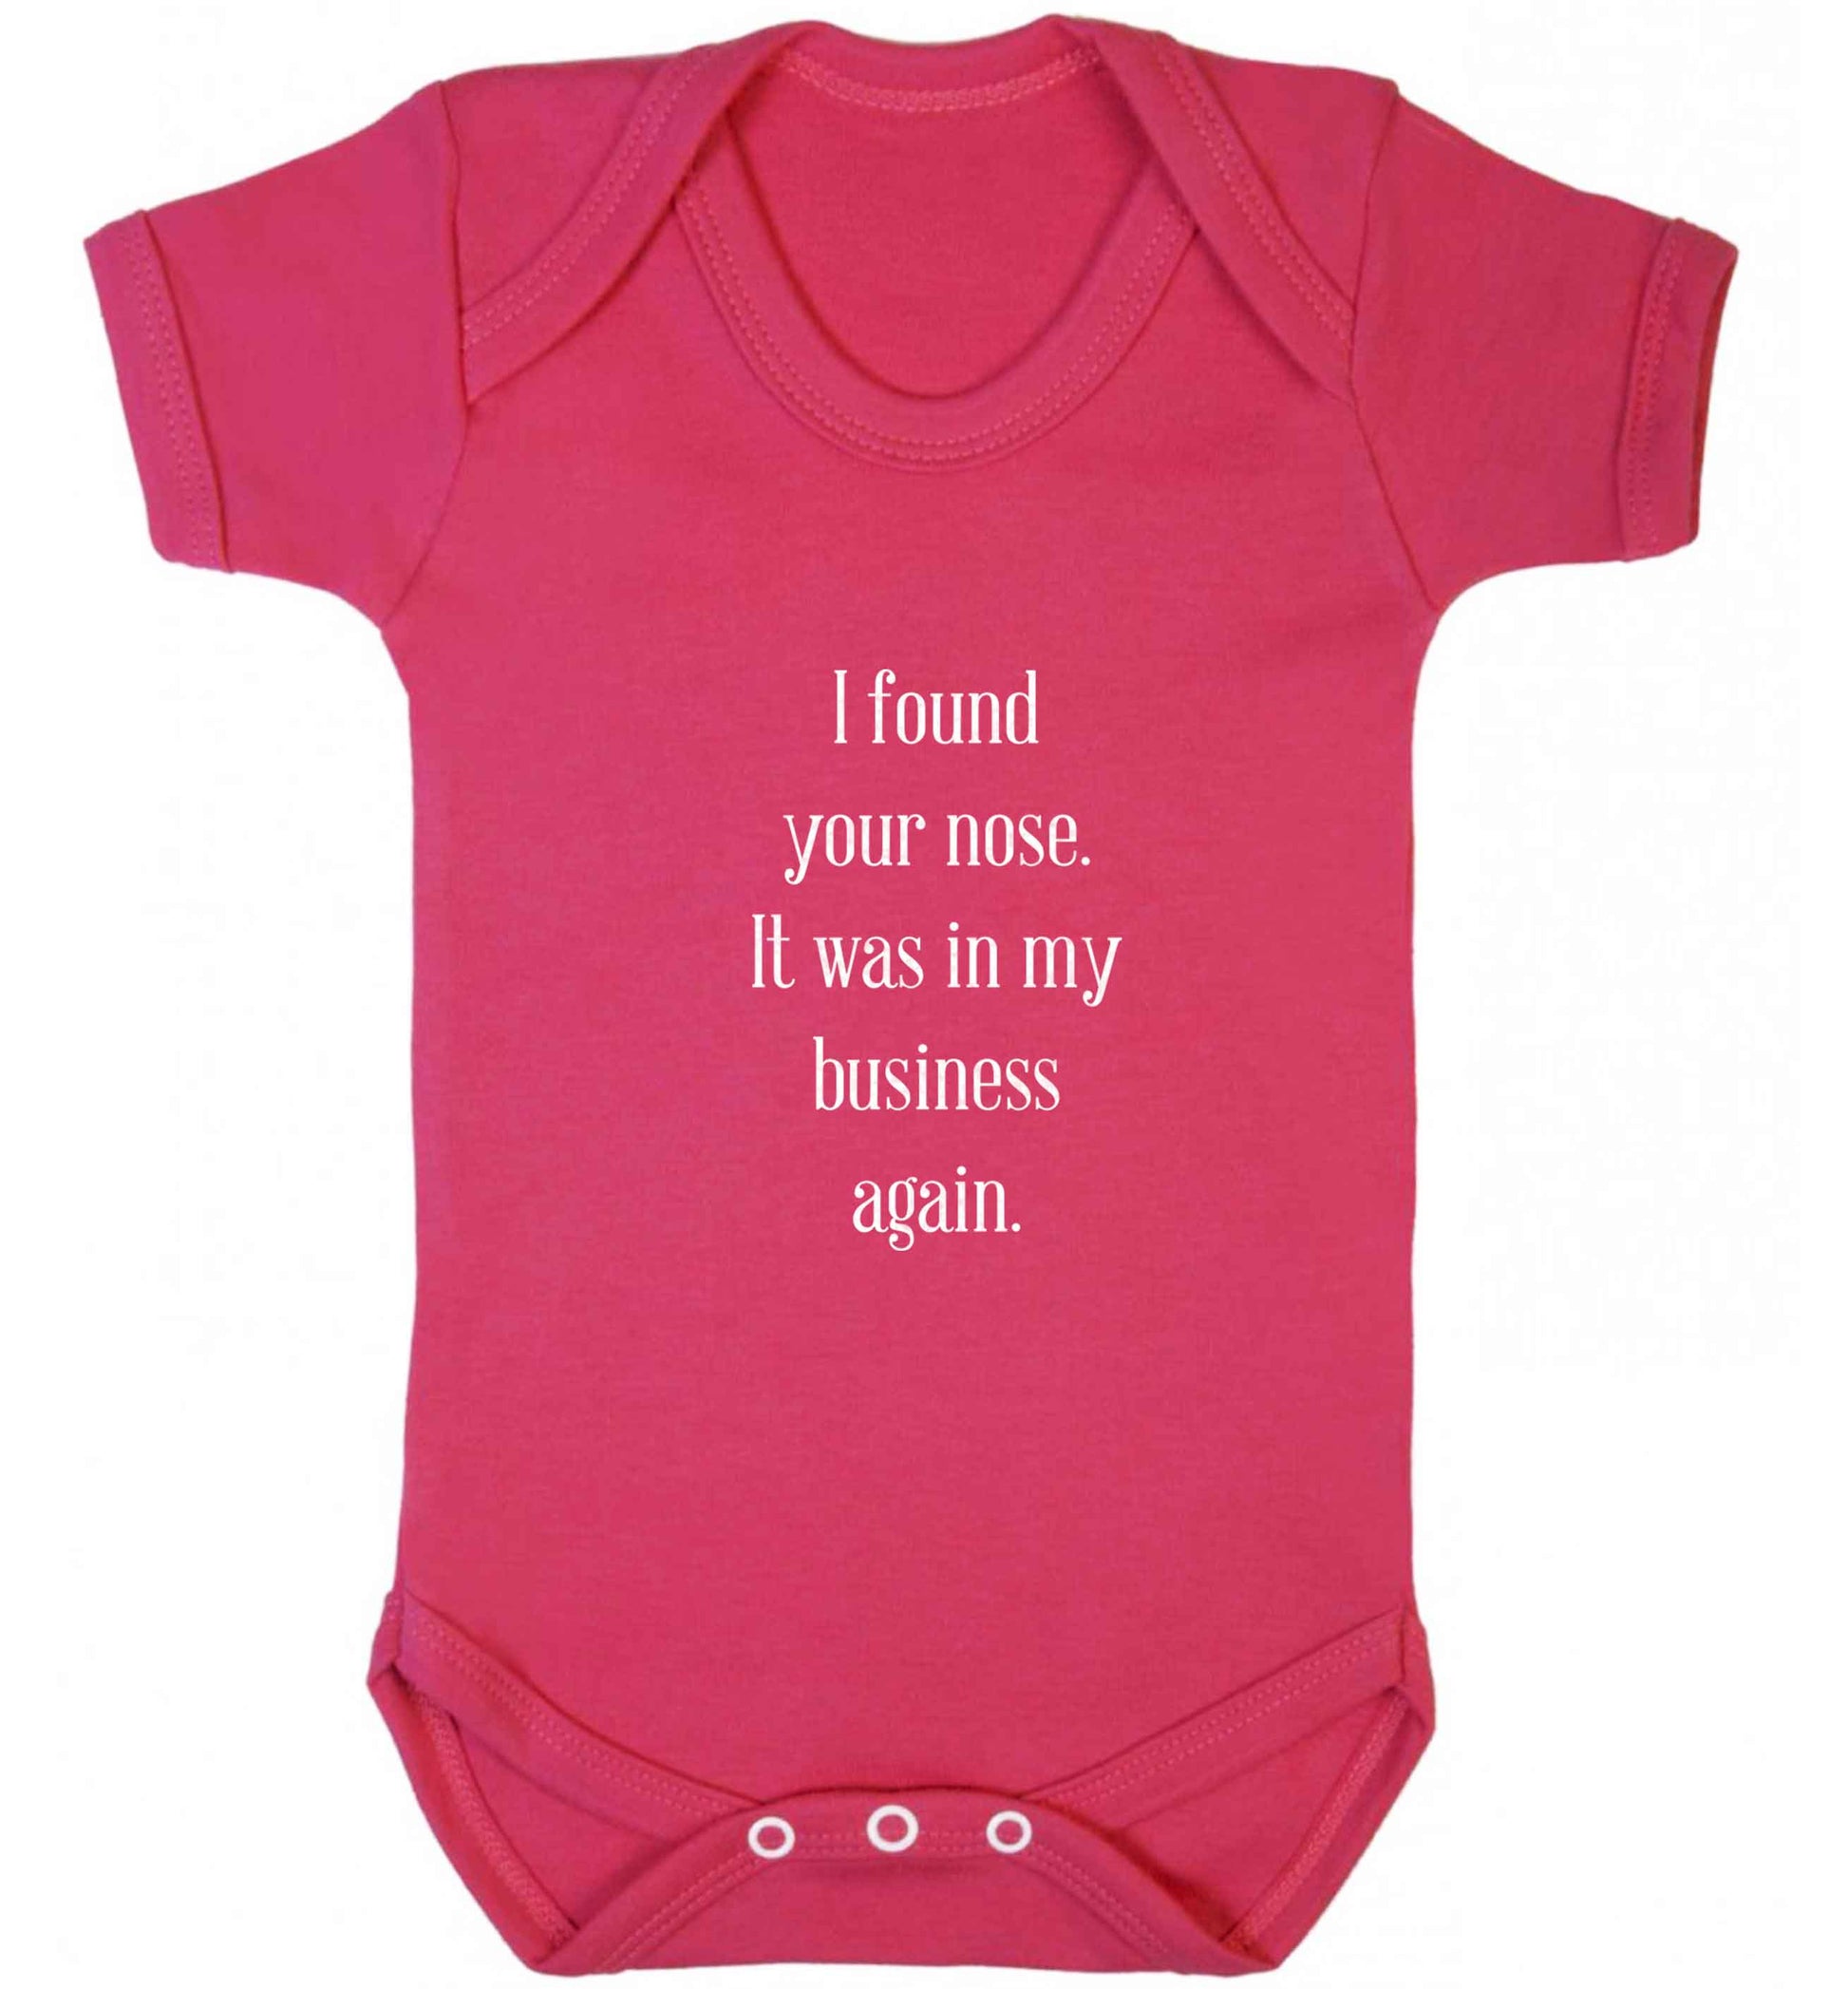 I found your nose it was in my business again baby vest dark pink 18-24 months